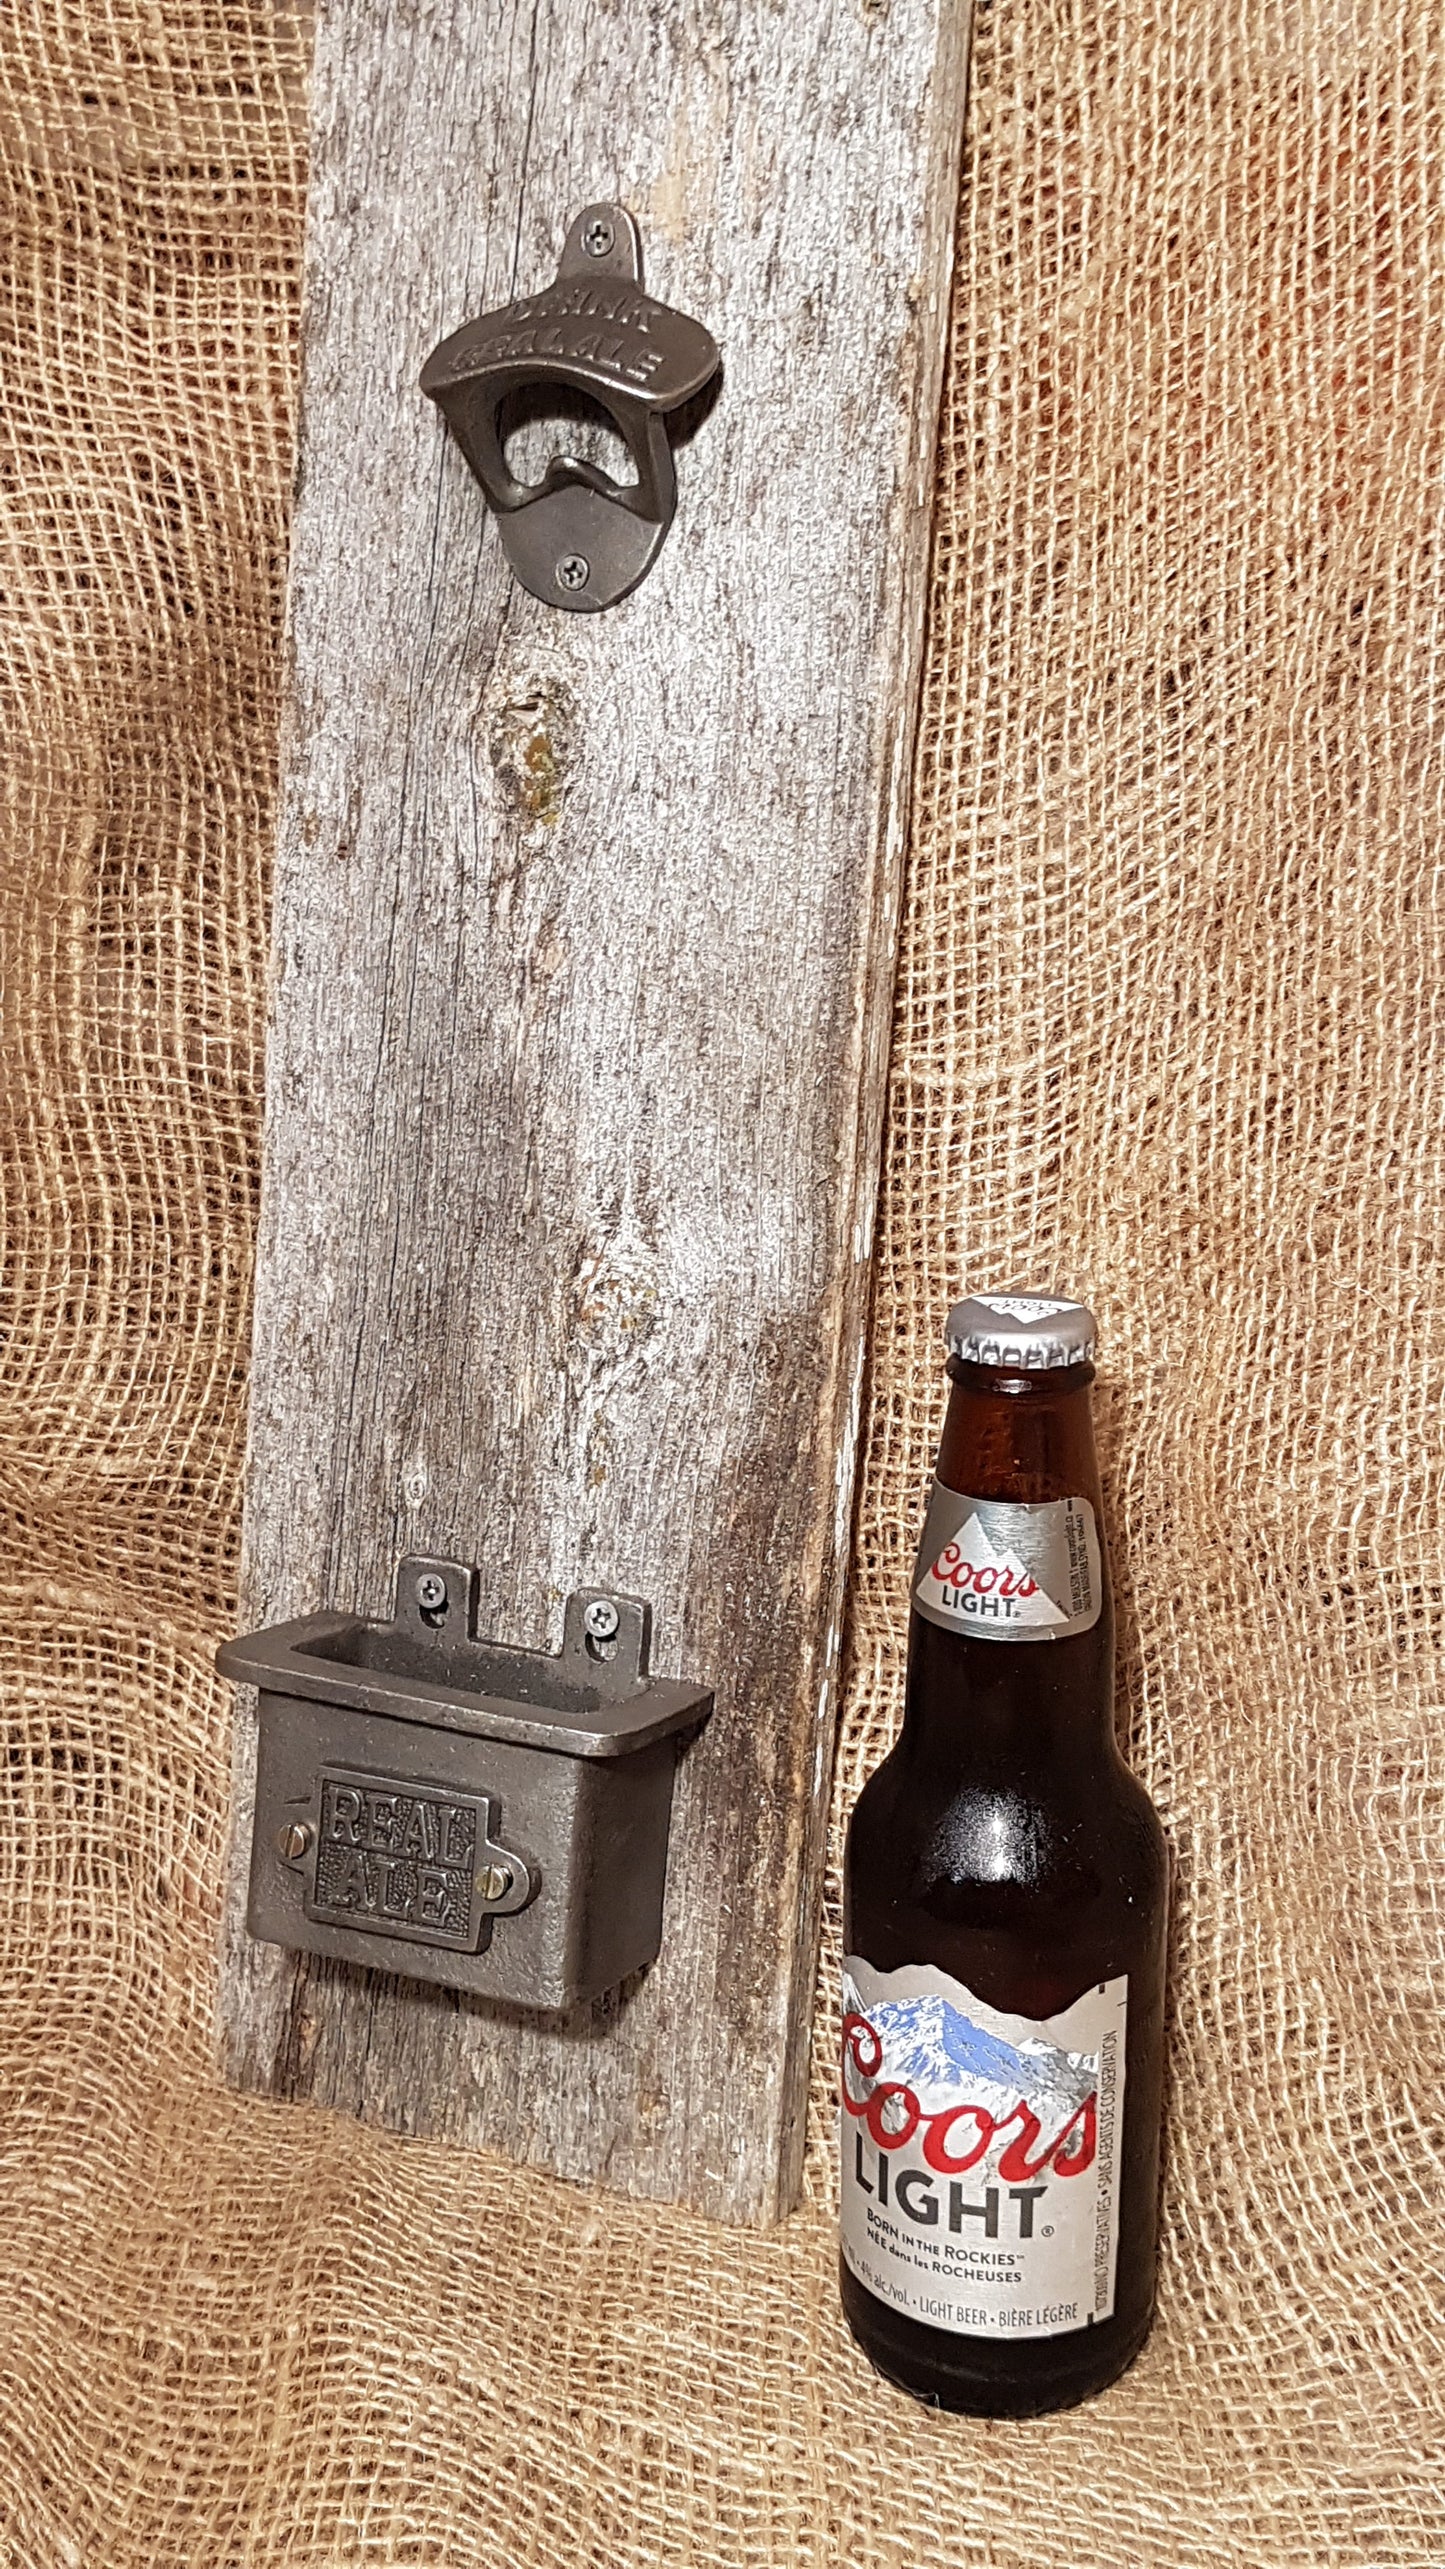 Beer Bottle Cap Catcher - Drink Real Ale - Spearhead Collection - Bottle Openers - Bottle Openers, Gift Ideas, The Man Cave